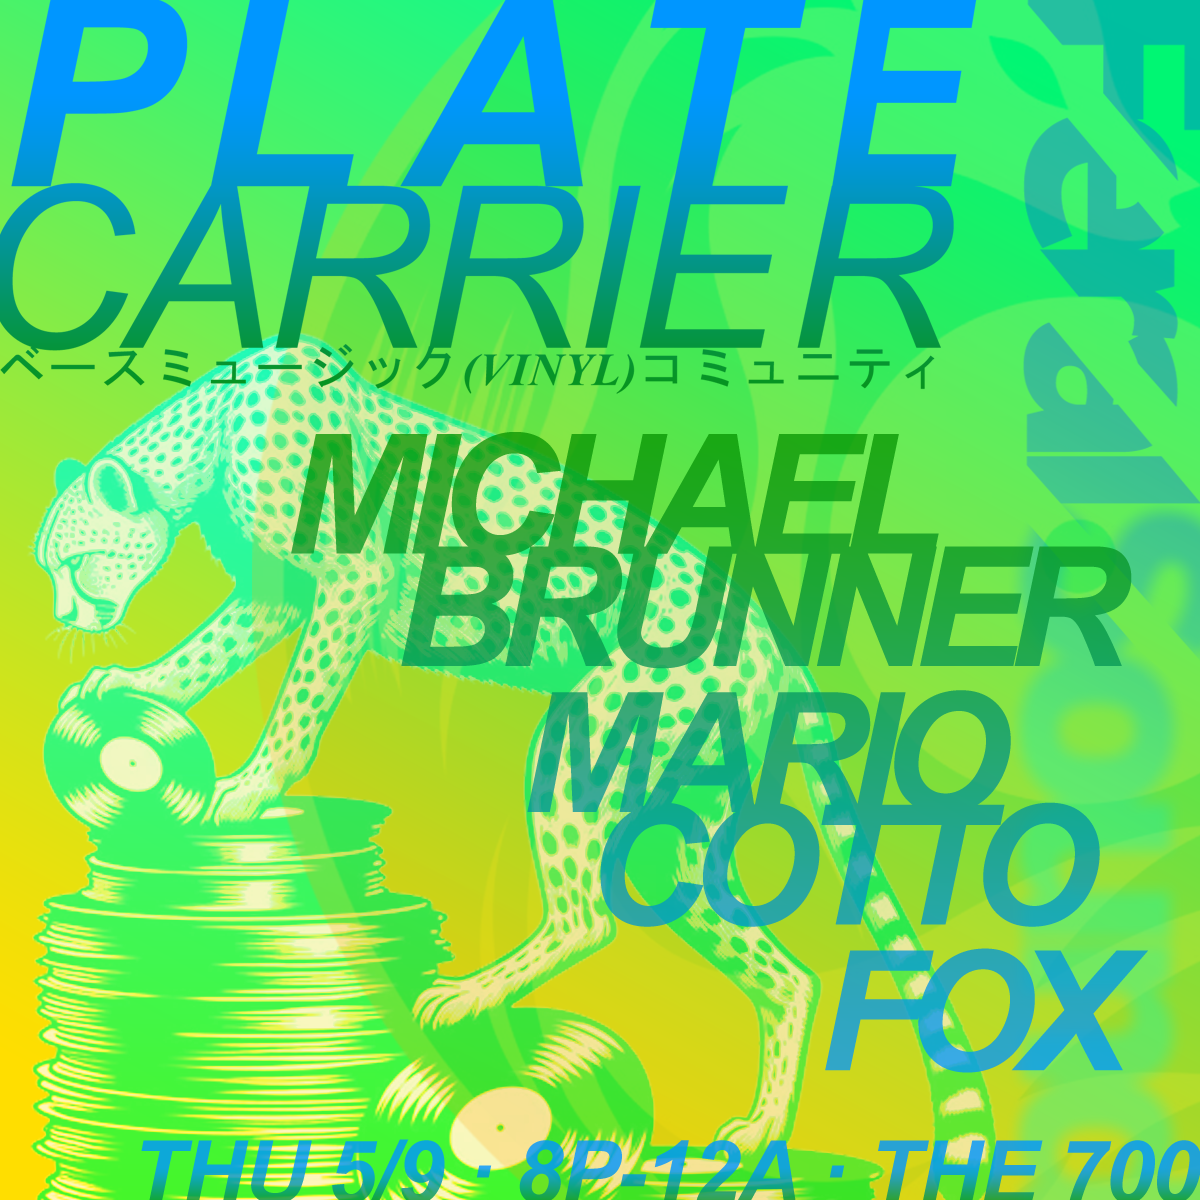 Plate Carrier #10 - Michael Brunner, Mario Cotto, Fox - Página frontal